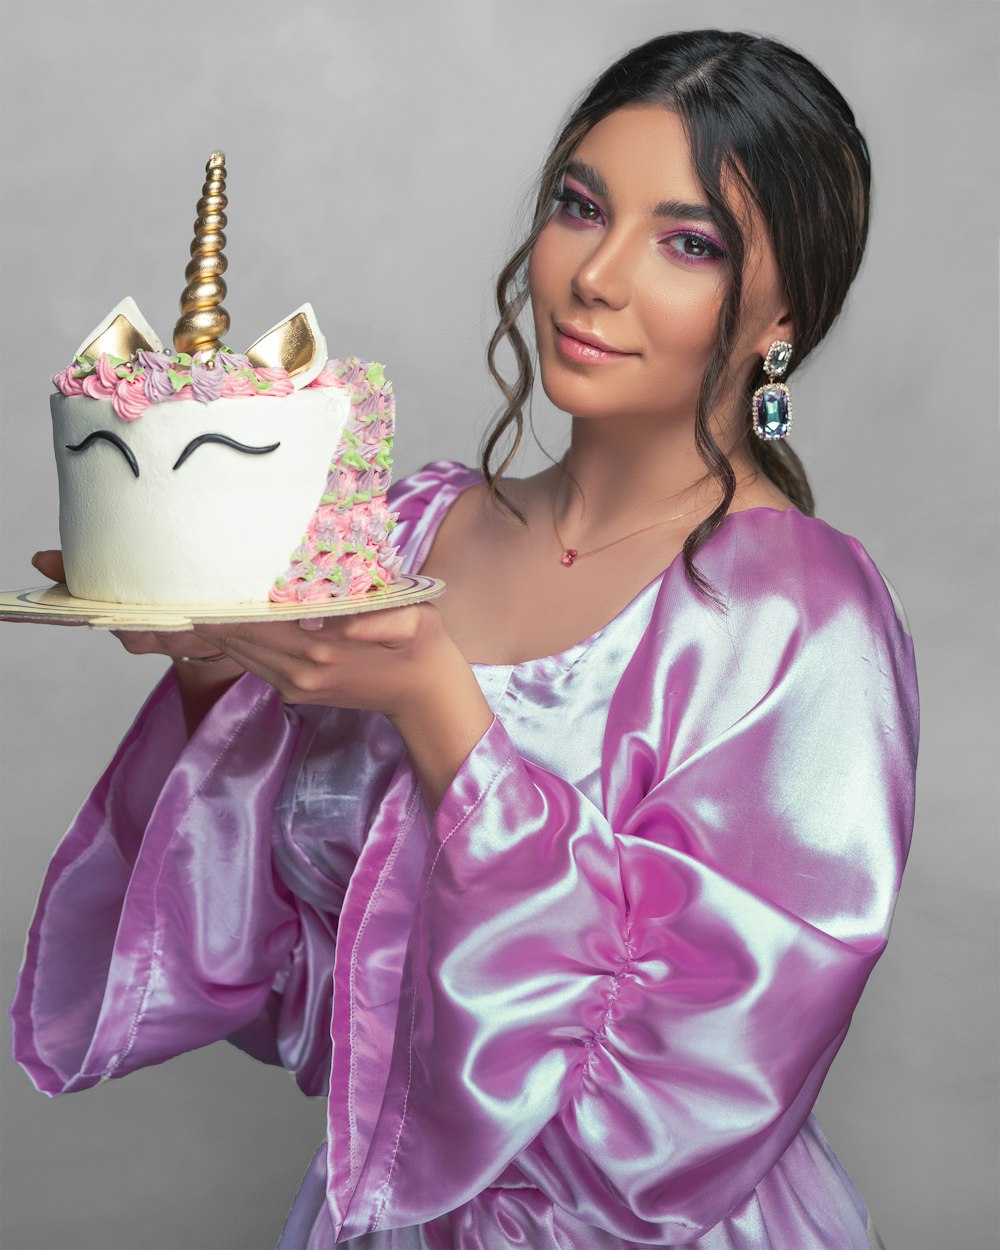 woman in pink and white floral dress holding white and gold cake